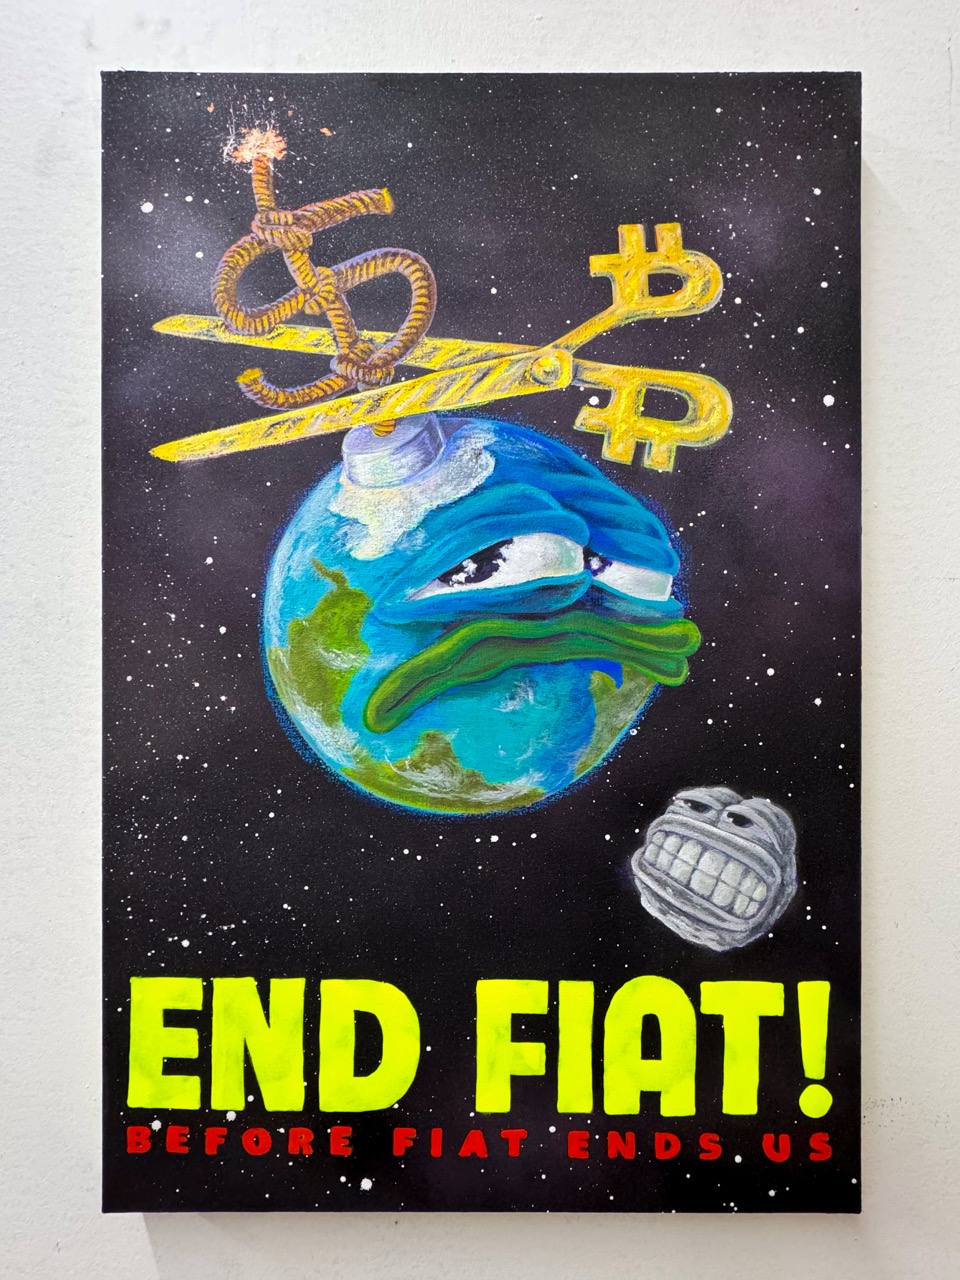 END FIAT! (BEFORE FIAT ENDS US)